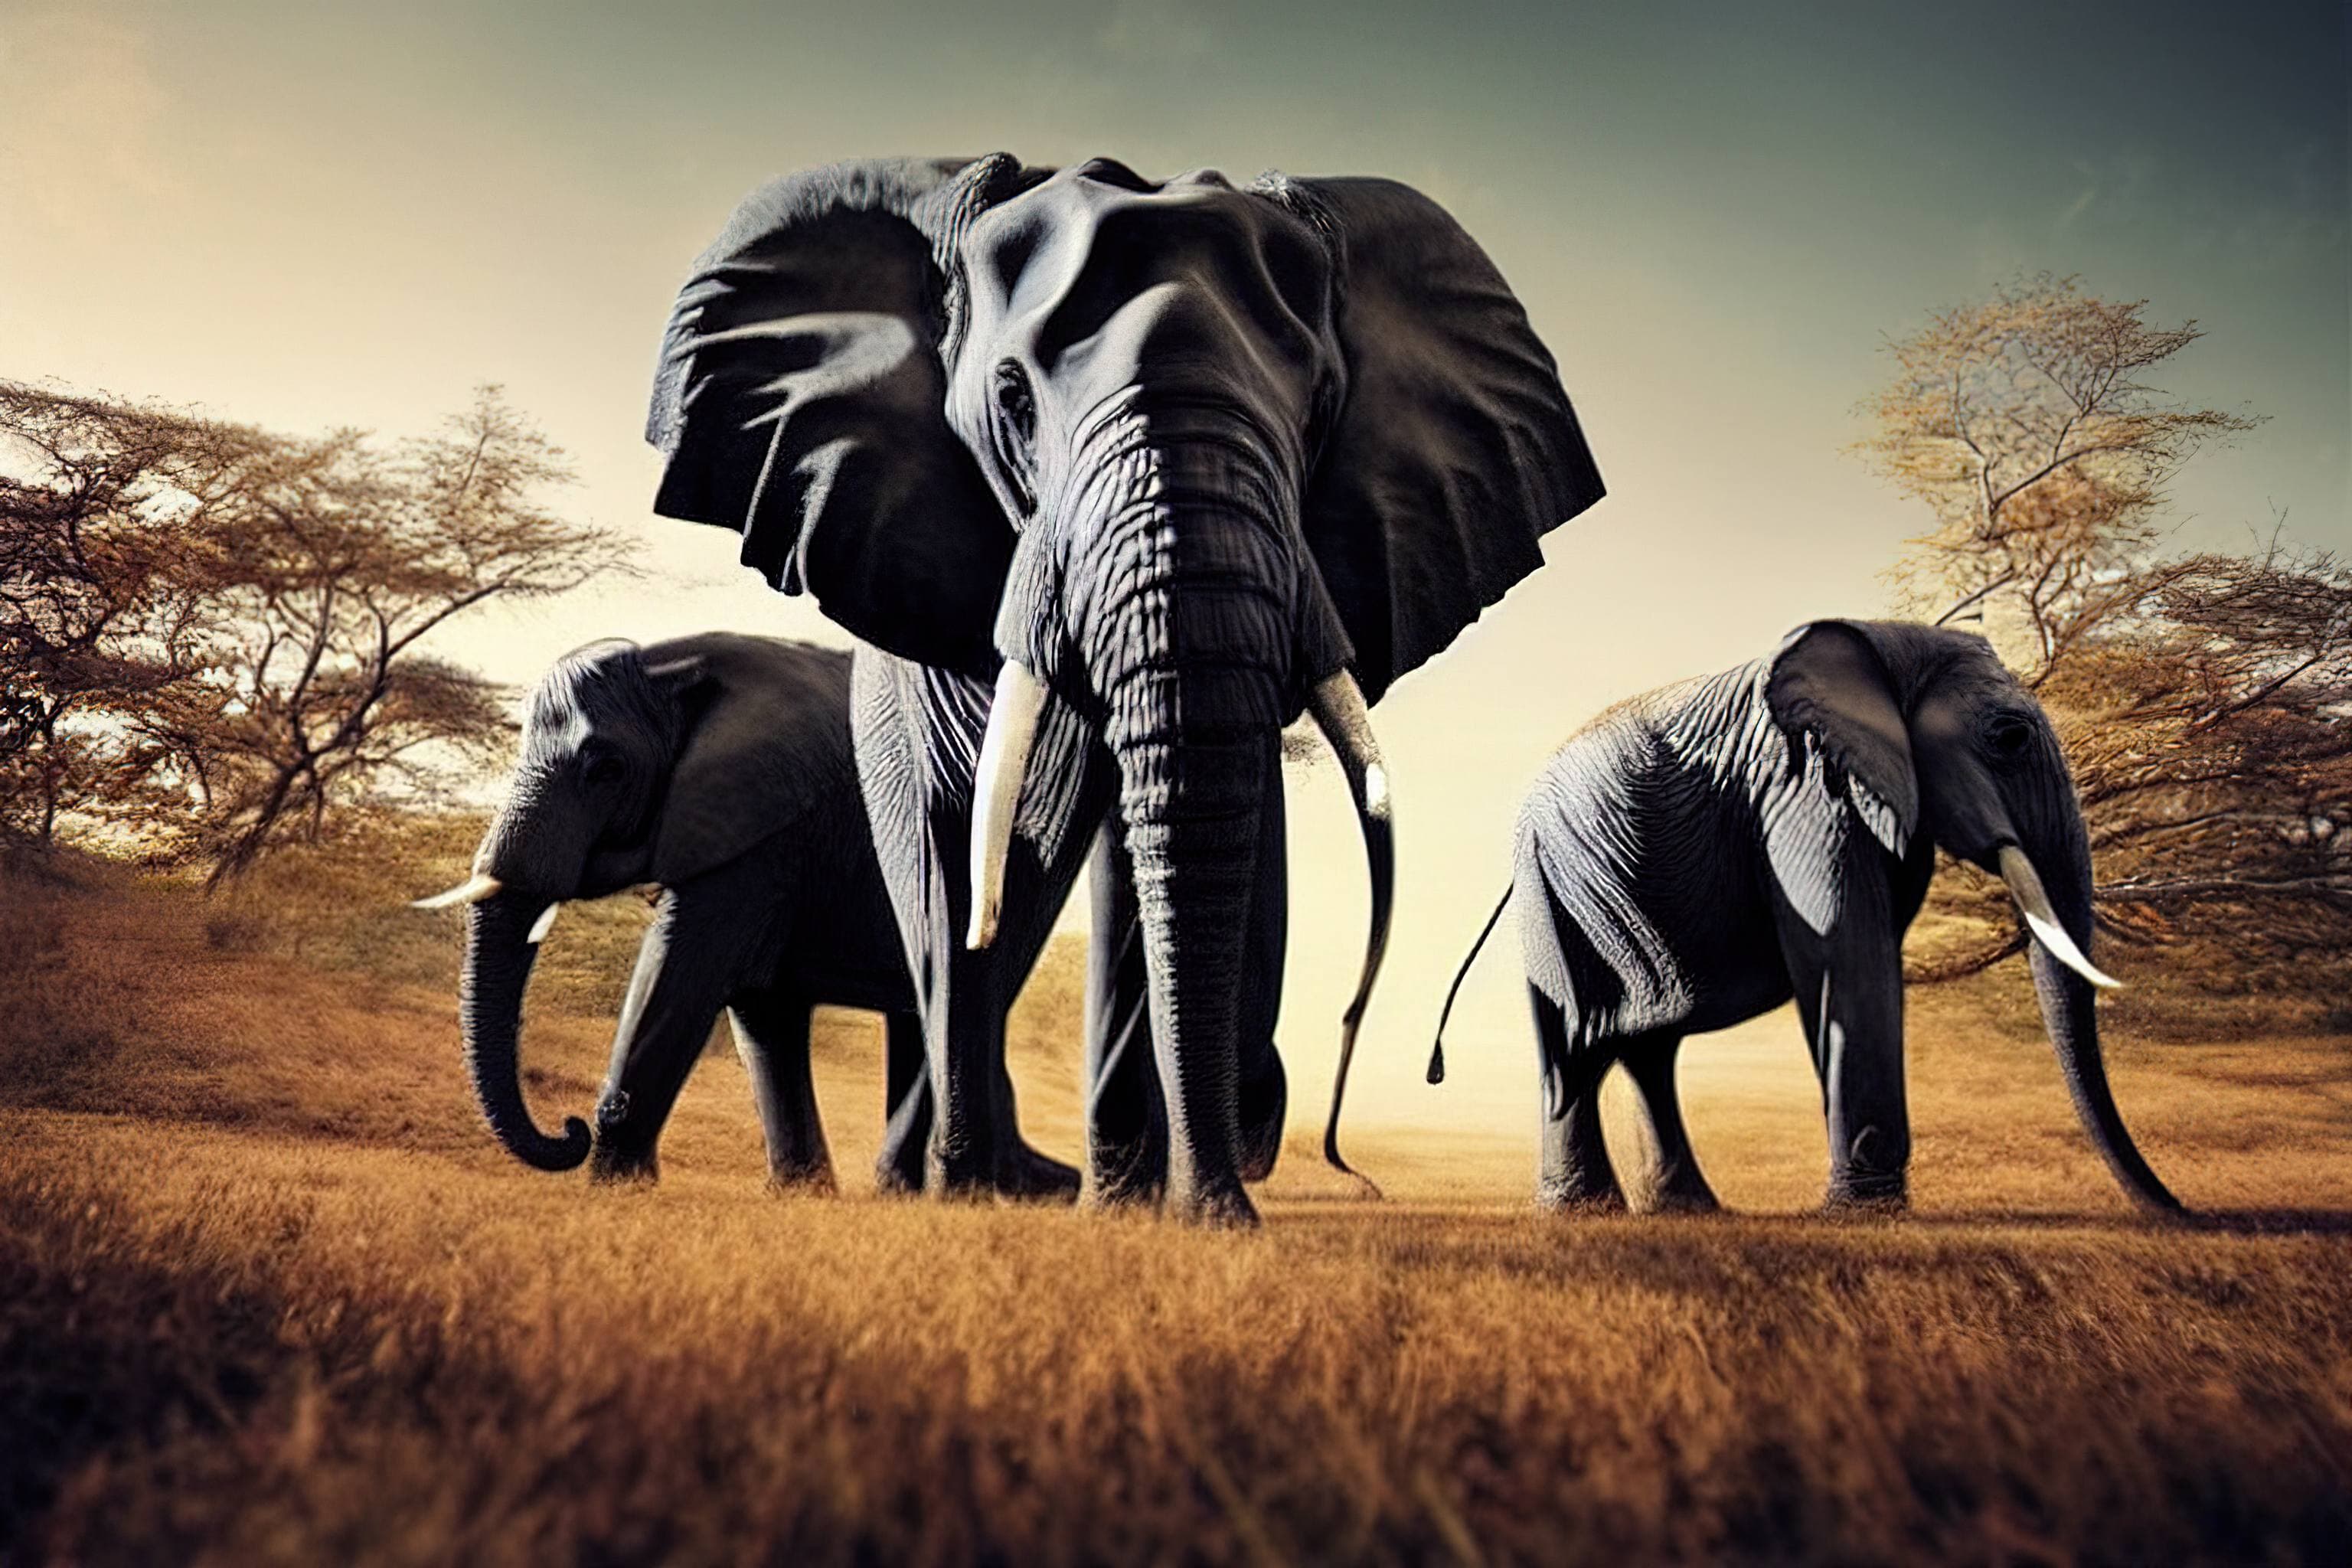 A group of elephants standing in the grass - Elephant